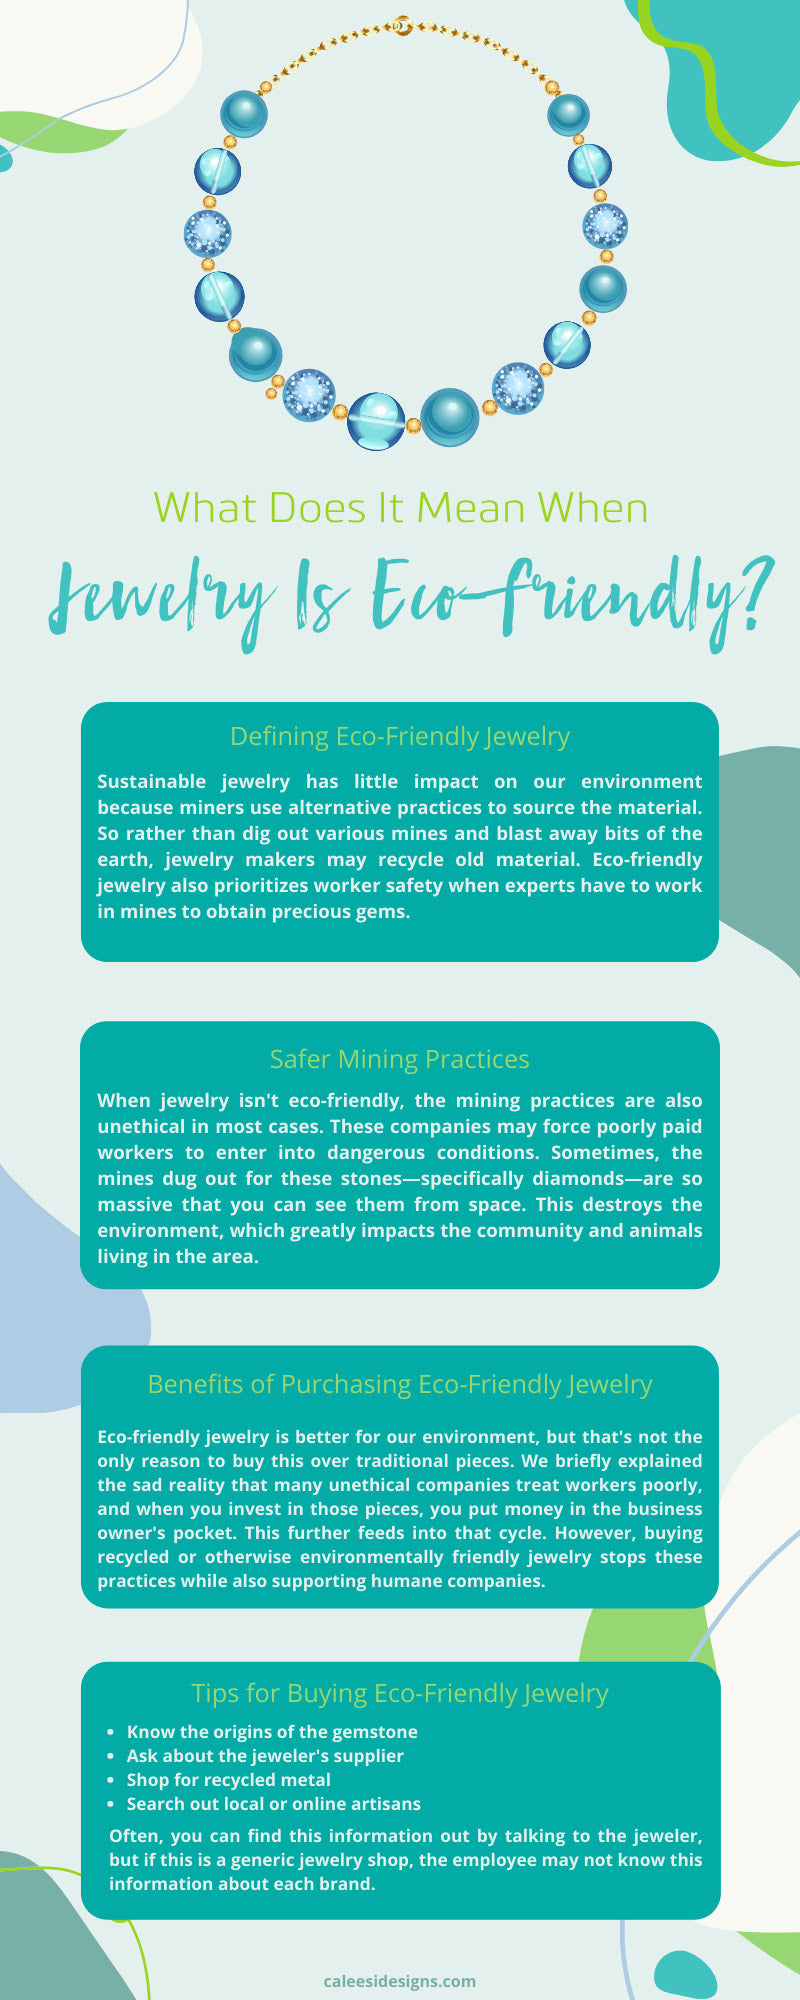 What Does It Mean When Jewelry Is Eco-Friendly?